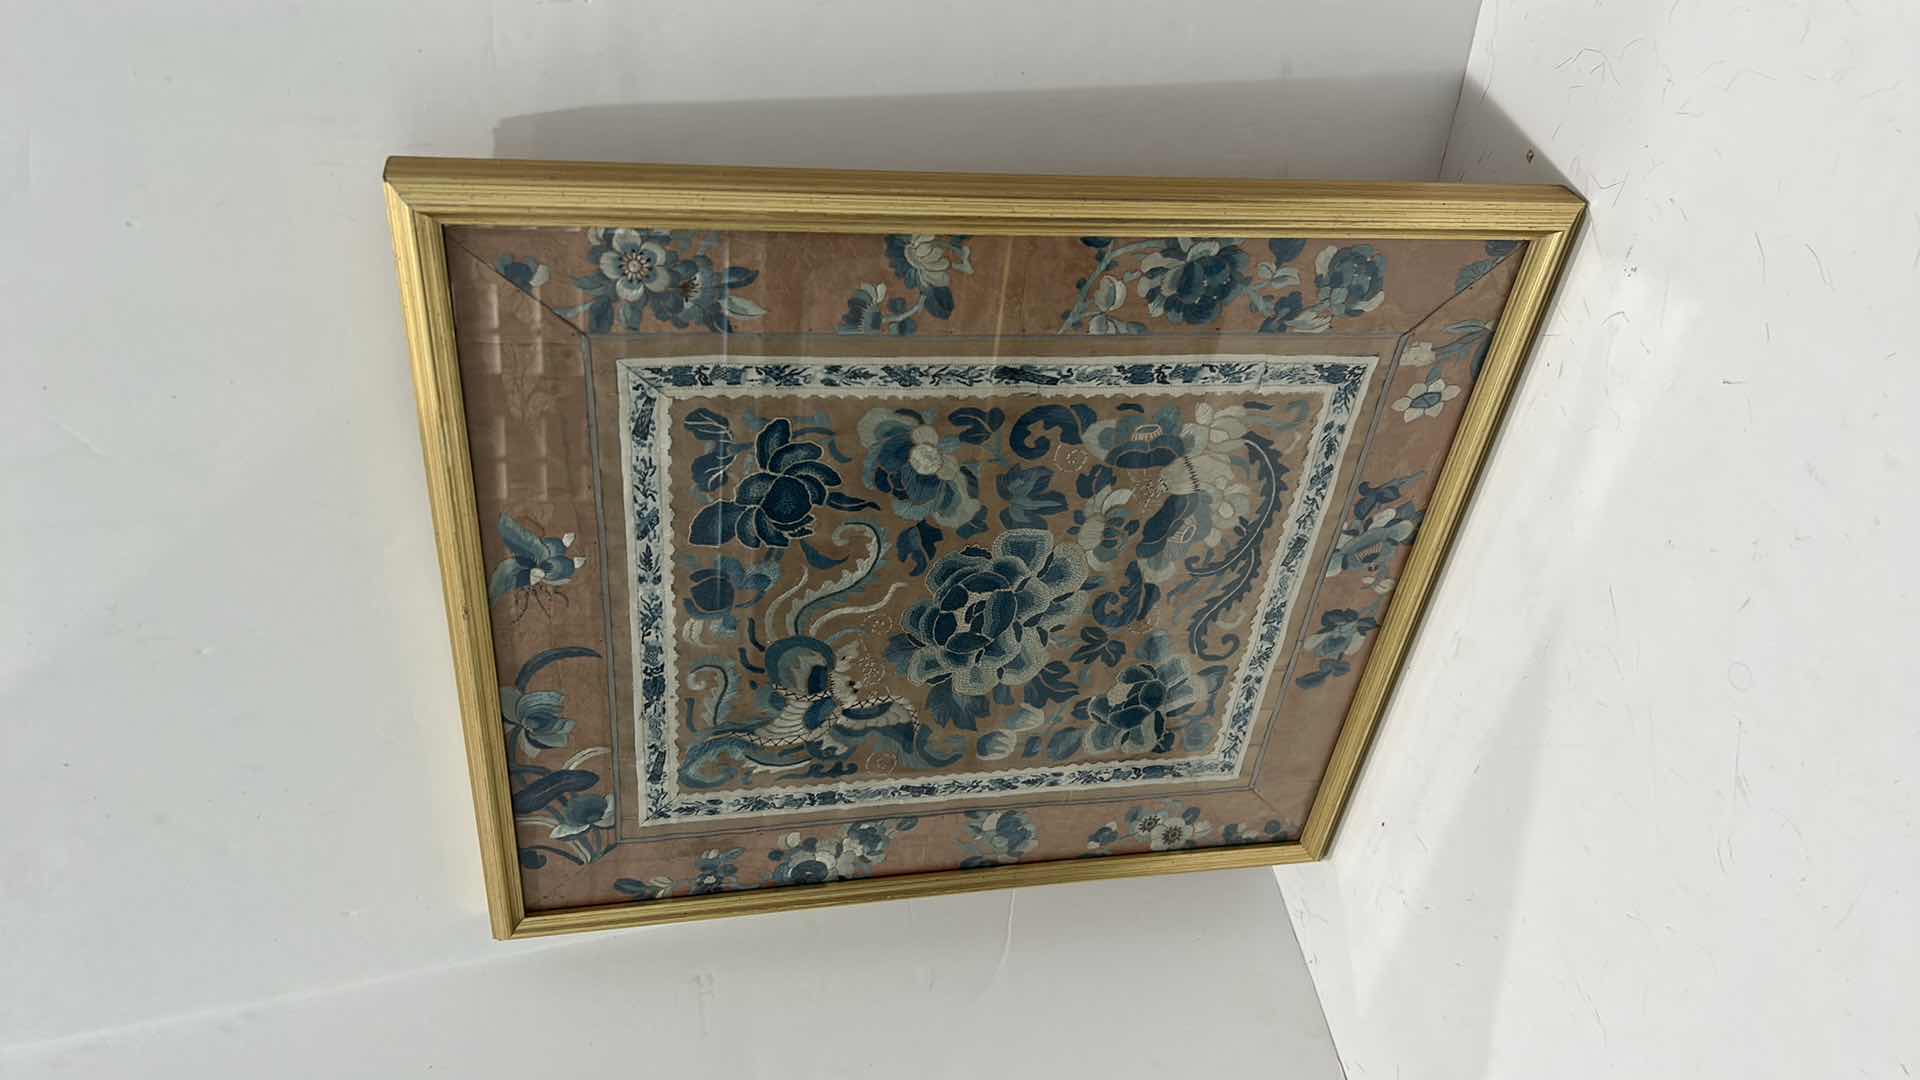 Photo 4 of ANTIQUE CHINESE TEXTILE FABRIC, SILK WITH SILK THREAD HAND EMBROIDERY ARTWORK FRAMED 16 1/2” x 18 1/2”